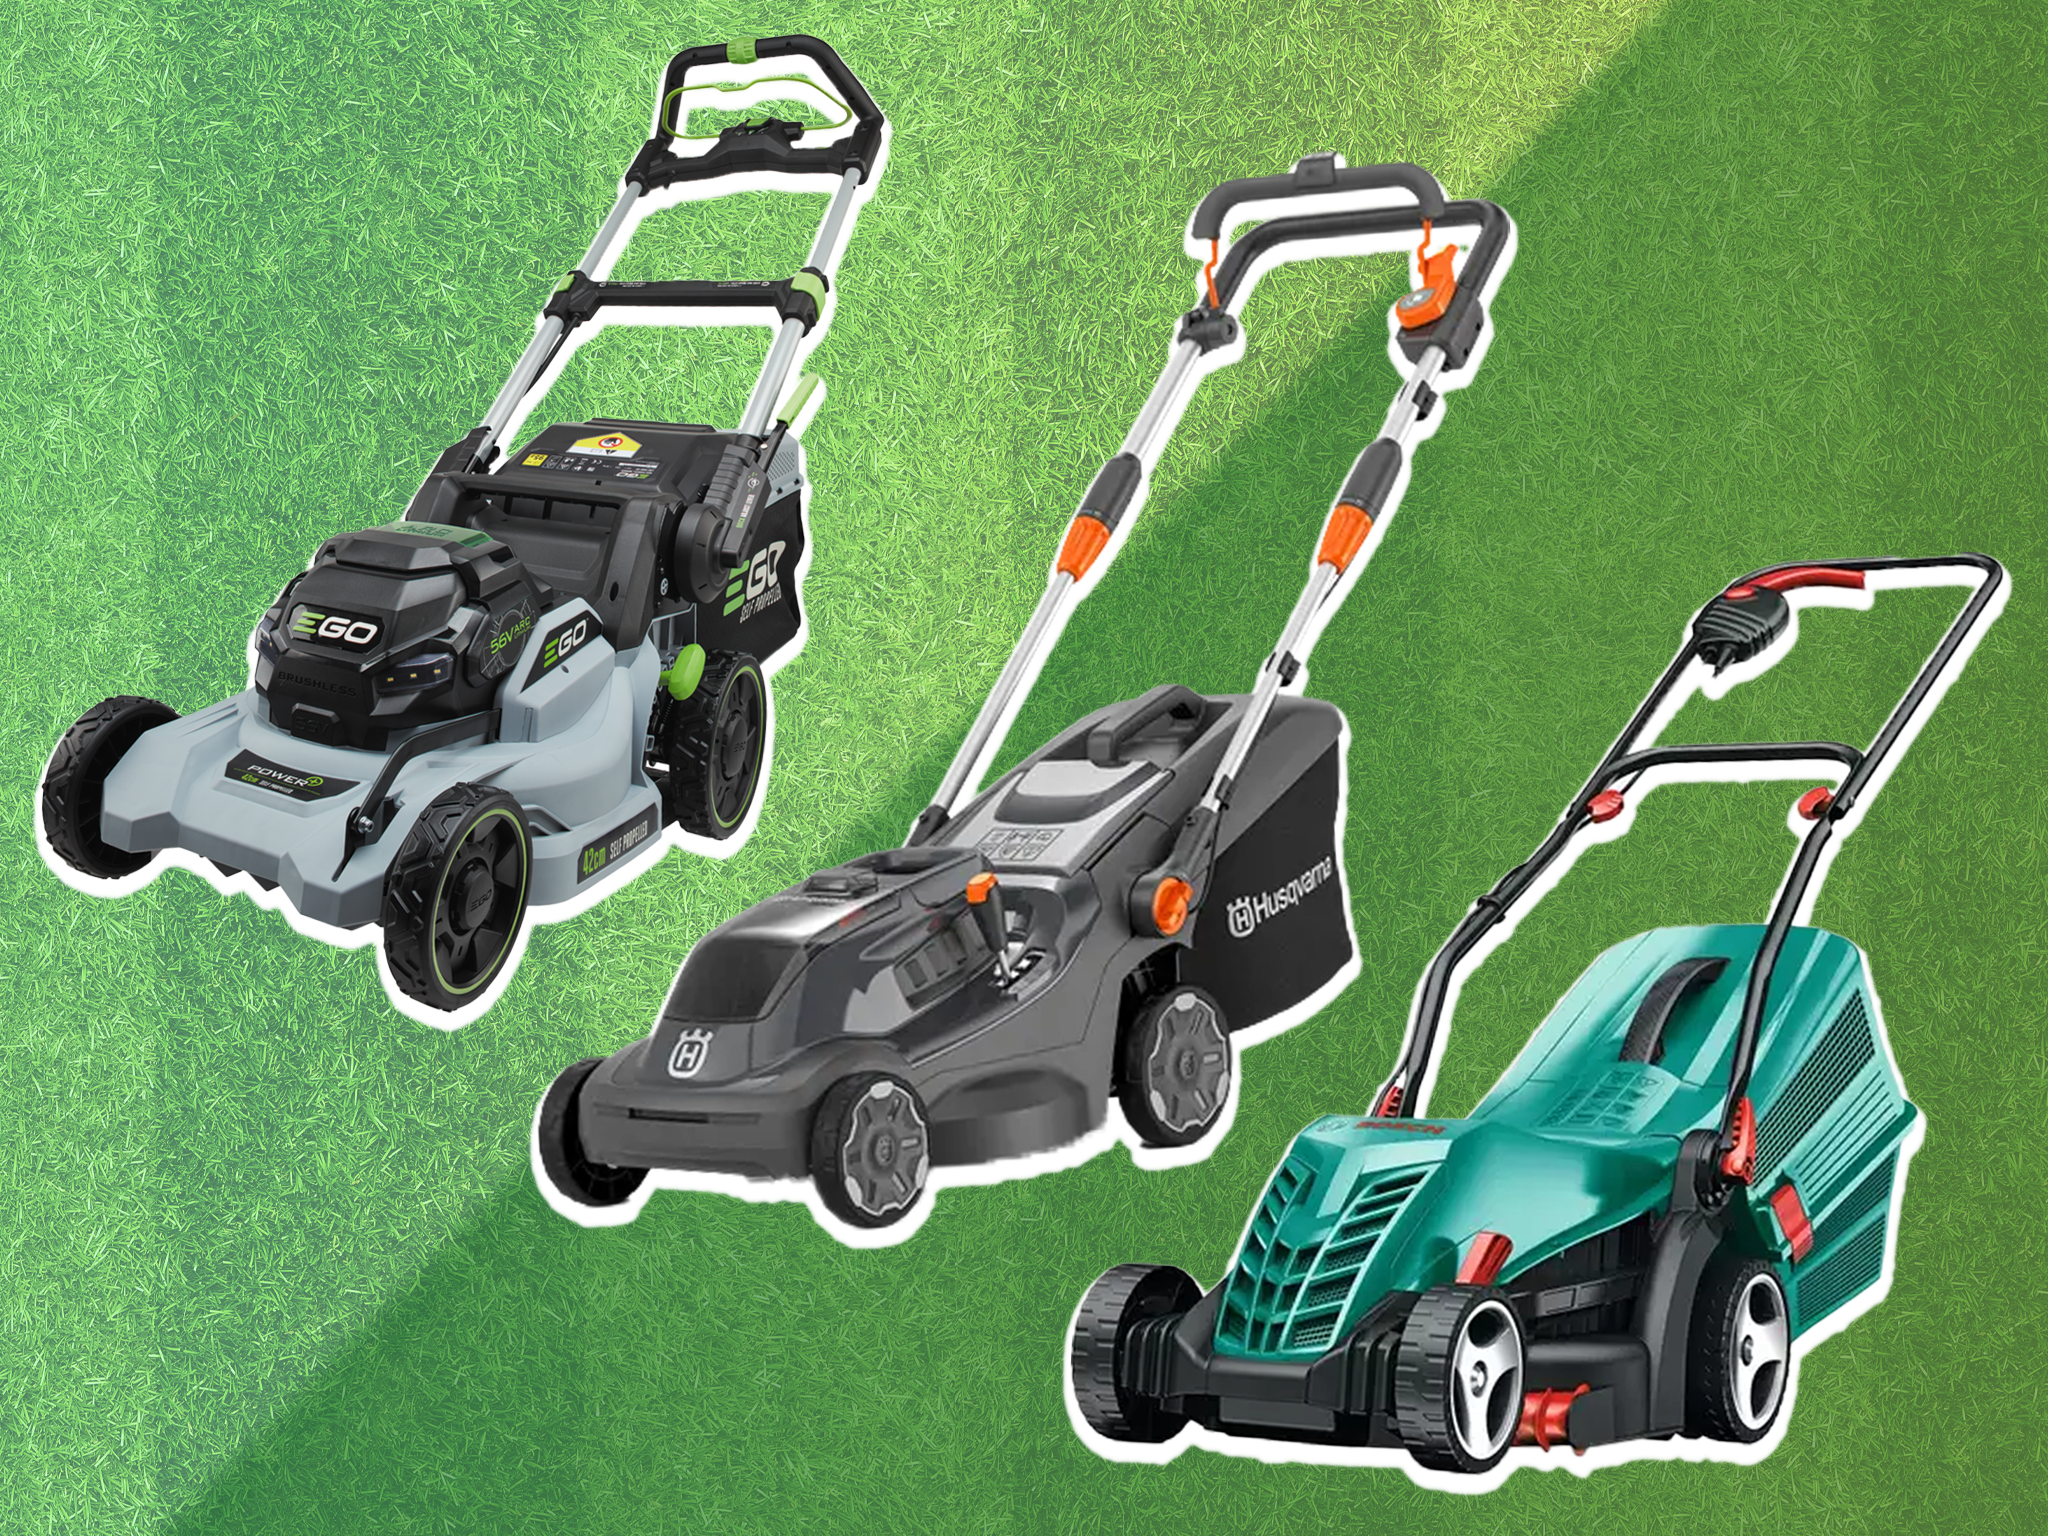 If you have these two reel mowers, which one will you keep? : r